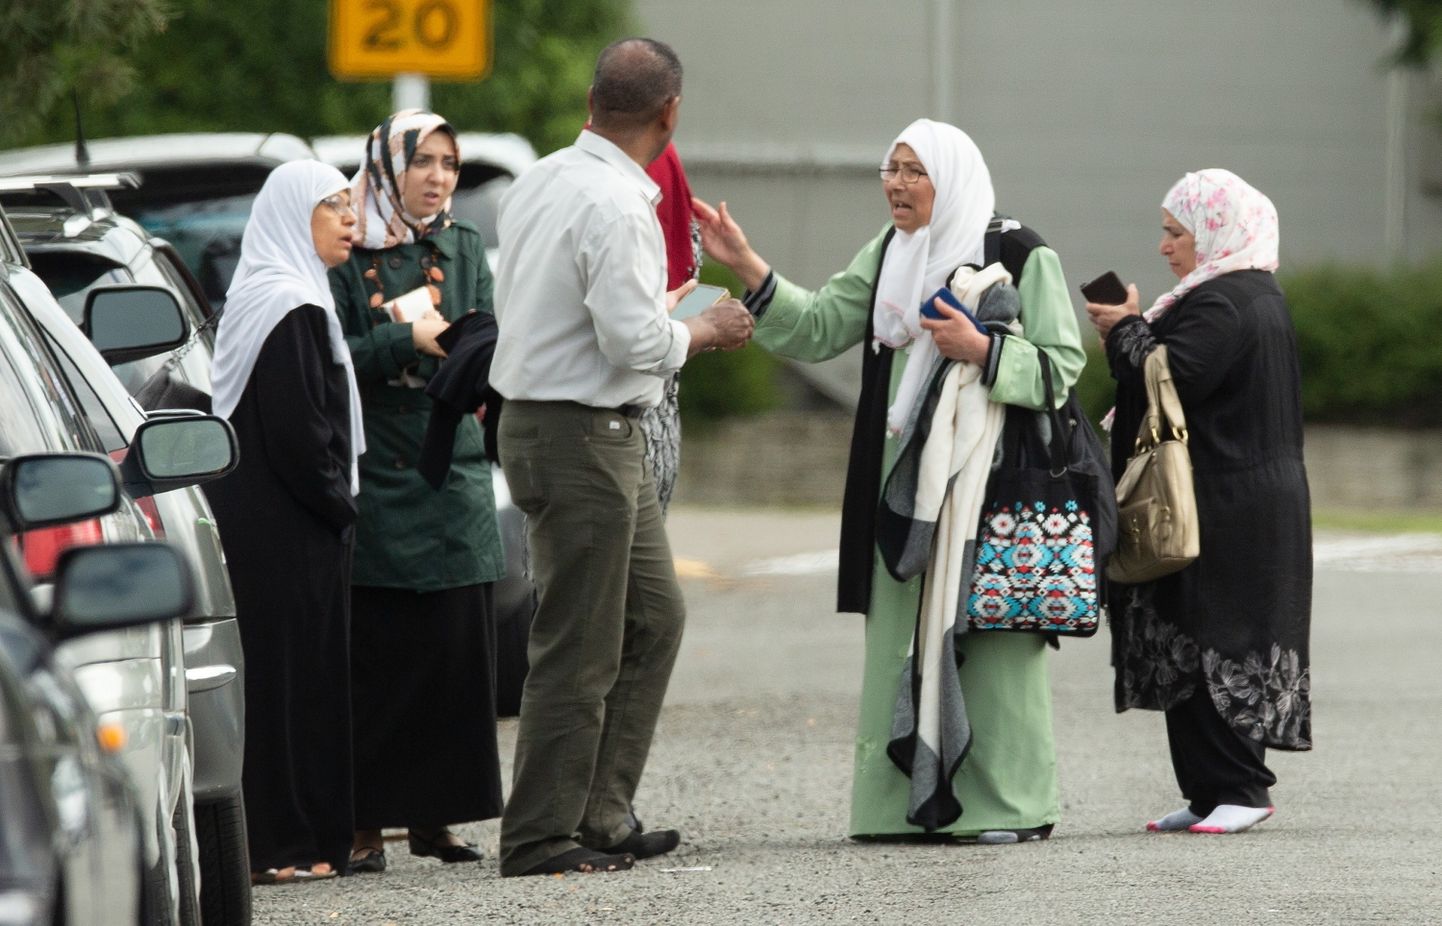 epa07438399 Shocked family members stand outside the mosque following a shooting resulting in multiple fatalies and injuries at the Masjid Al Noor on Deans Avenue in Christchurch, New Zealand, 15 March 2019. According to media reports on 15 March 2019, at least one gunman opened fire at around 1:40 pm local time after walking into the Masjid Al Noor Mosque, killing and wounding several of people. Armed police officers were deployed to the scene, along with emergency service personnel. There are also confirmed reports of a shooting at a second mosque in Christchurch, and both incidents have left at least 40 people dead and more than 20 people seriously wounded. Four people are in custody in connection with the shootings.  EPA/Martin Hunter NEW ZEALAND OUT